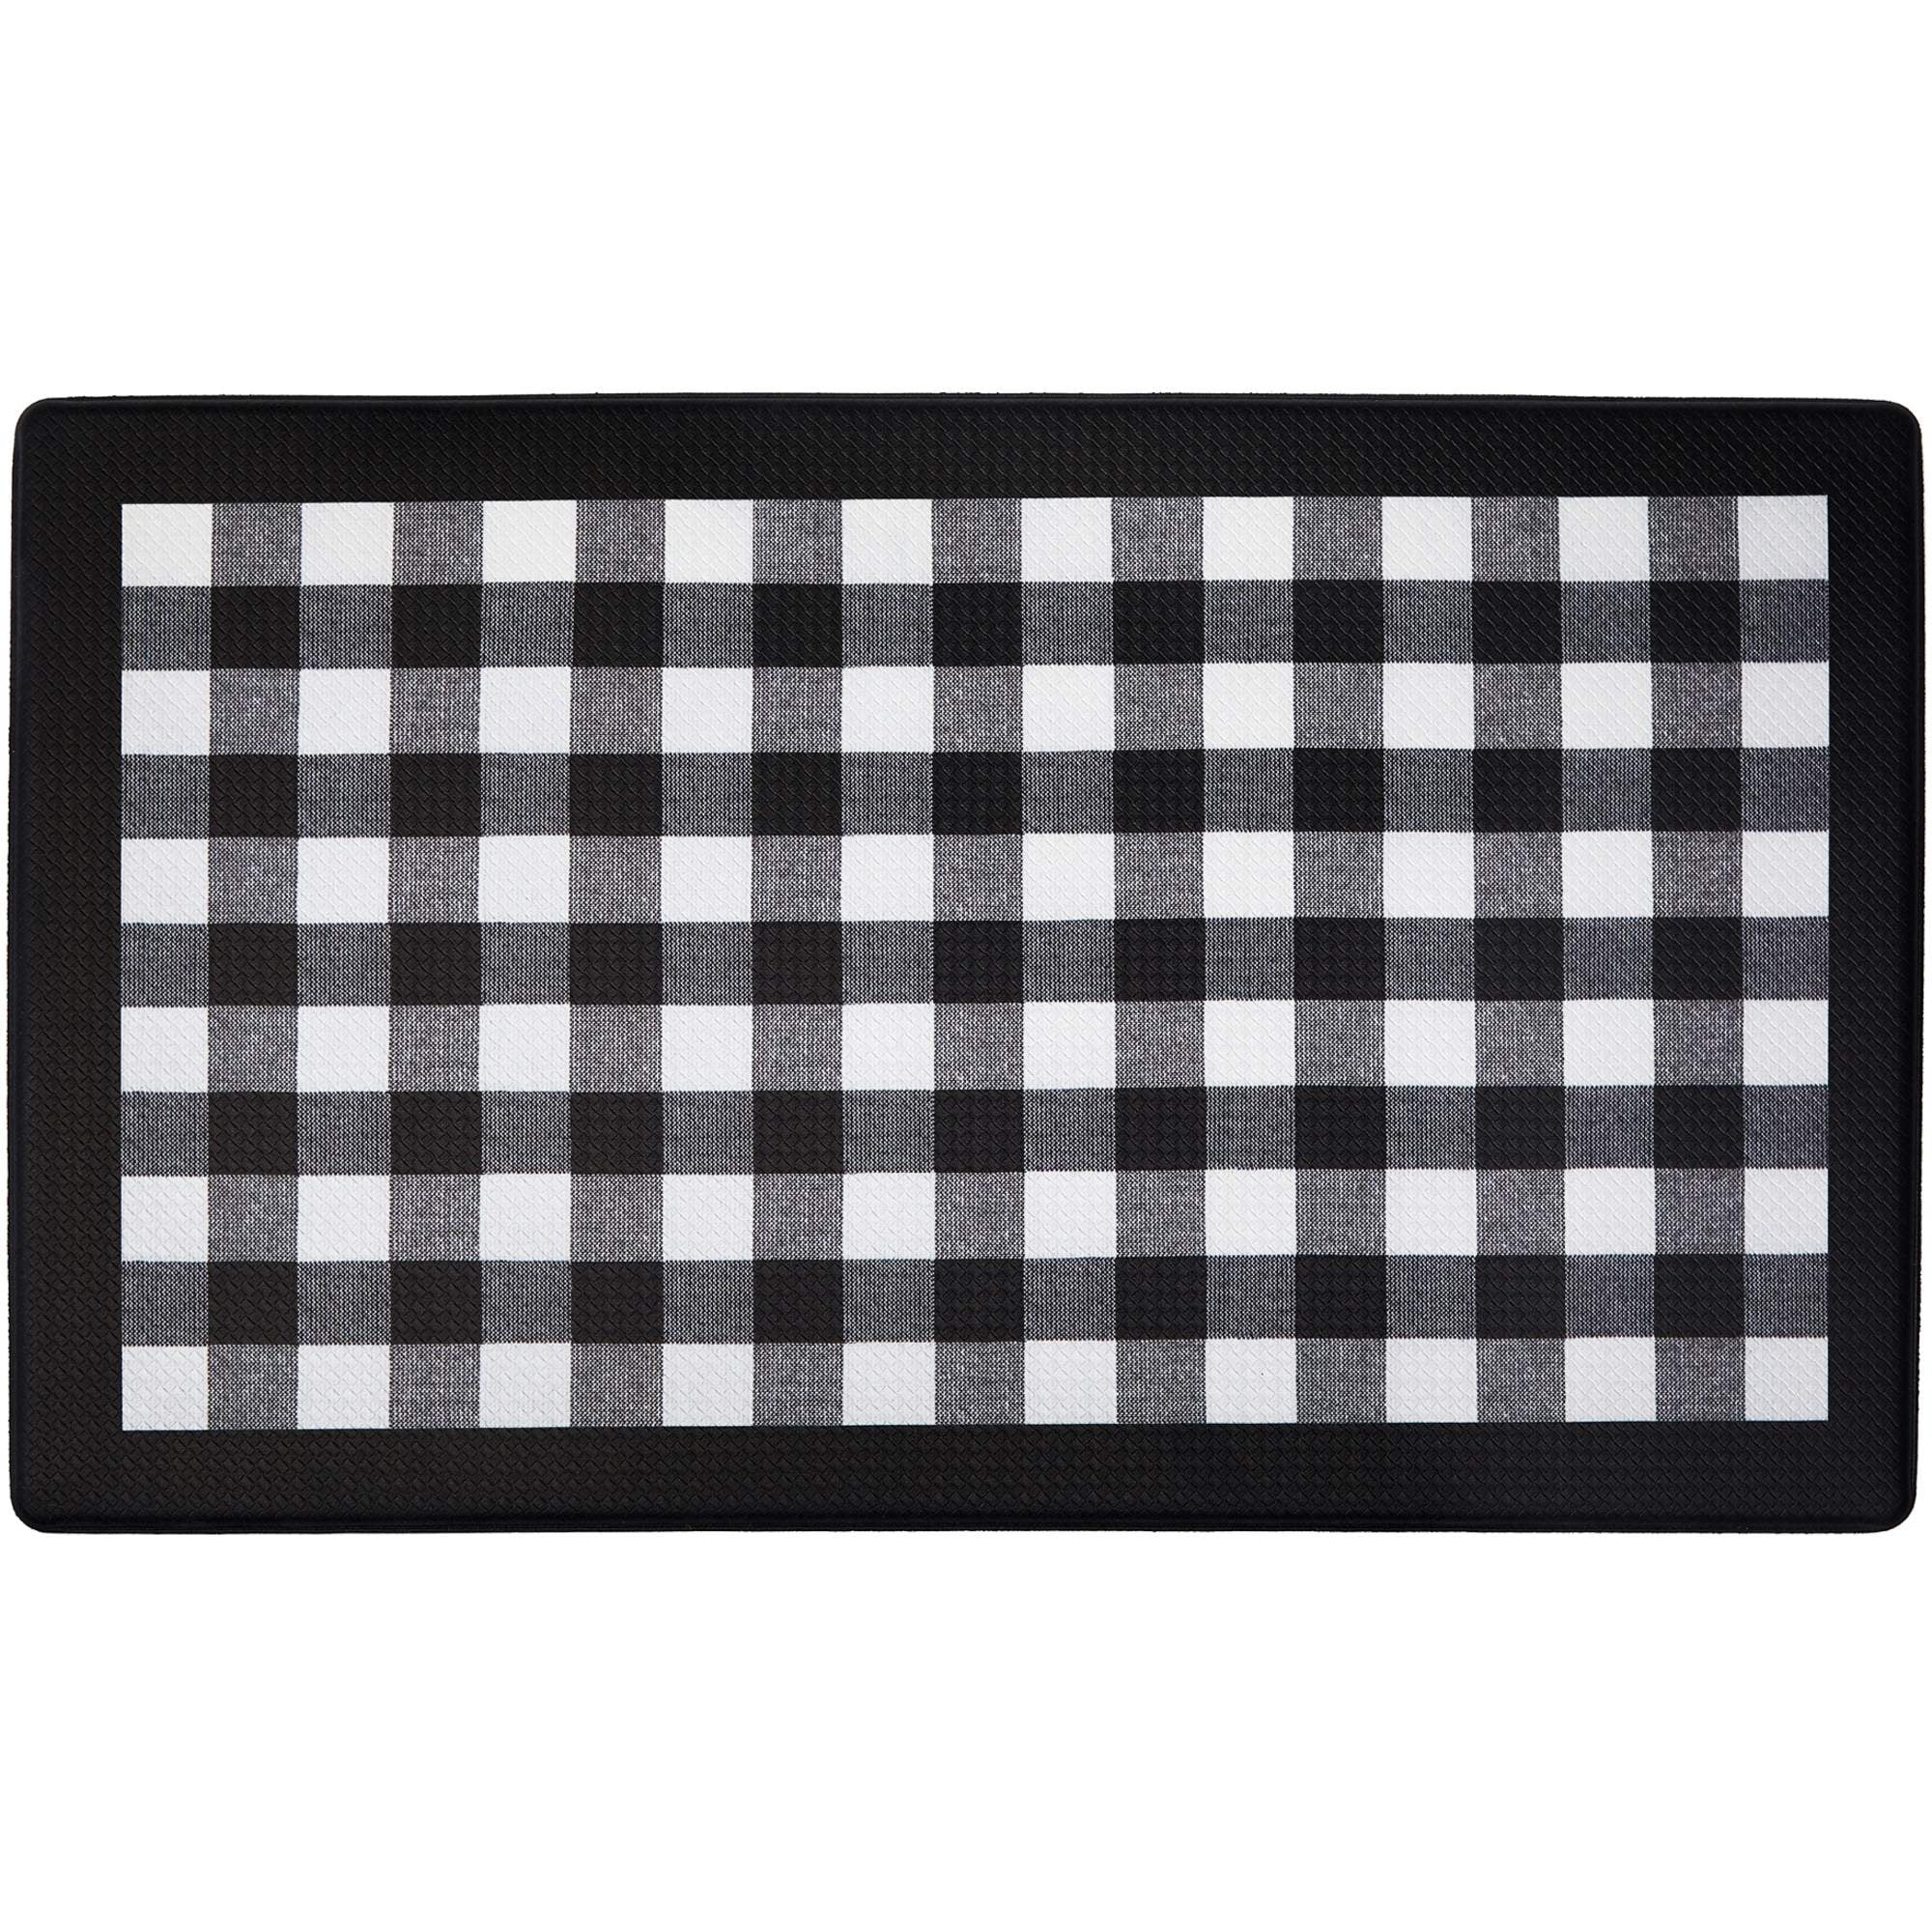 Waterproof Non Slip Rubber Back Kitchen Mat For Indoor Outdoor 18 x 29+18 x 47 KIMODE 2 Piece Checkered PVC Leather Heavy Duty Standing Desk Mat Buffalo Plaid Anti Fatigue Kitchen Floor Rug Set 